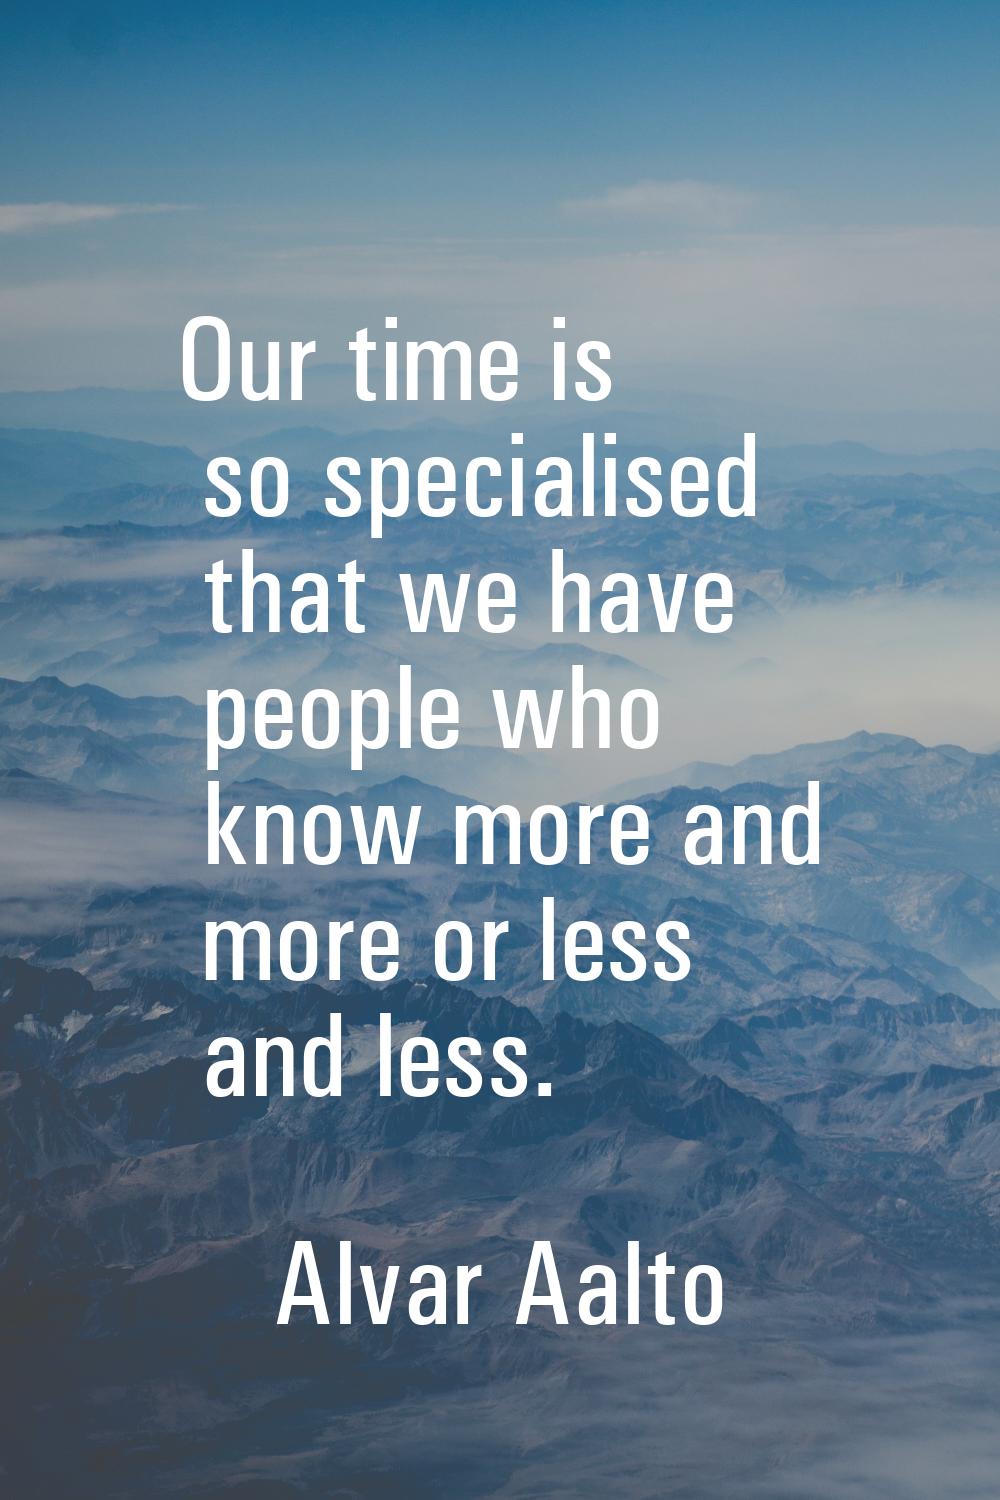 Our time is so specialised that we have people who know more and more or less and less.